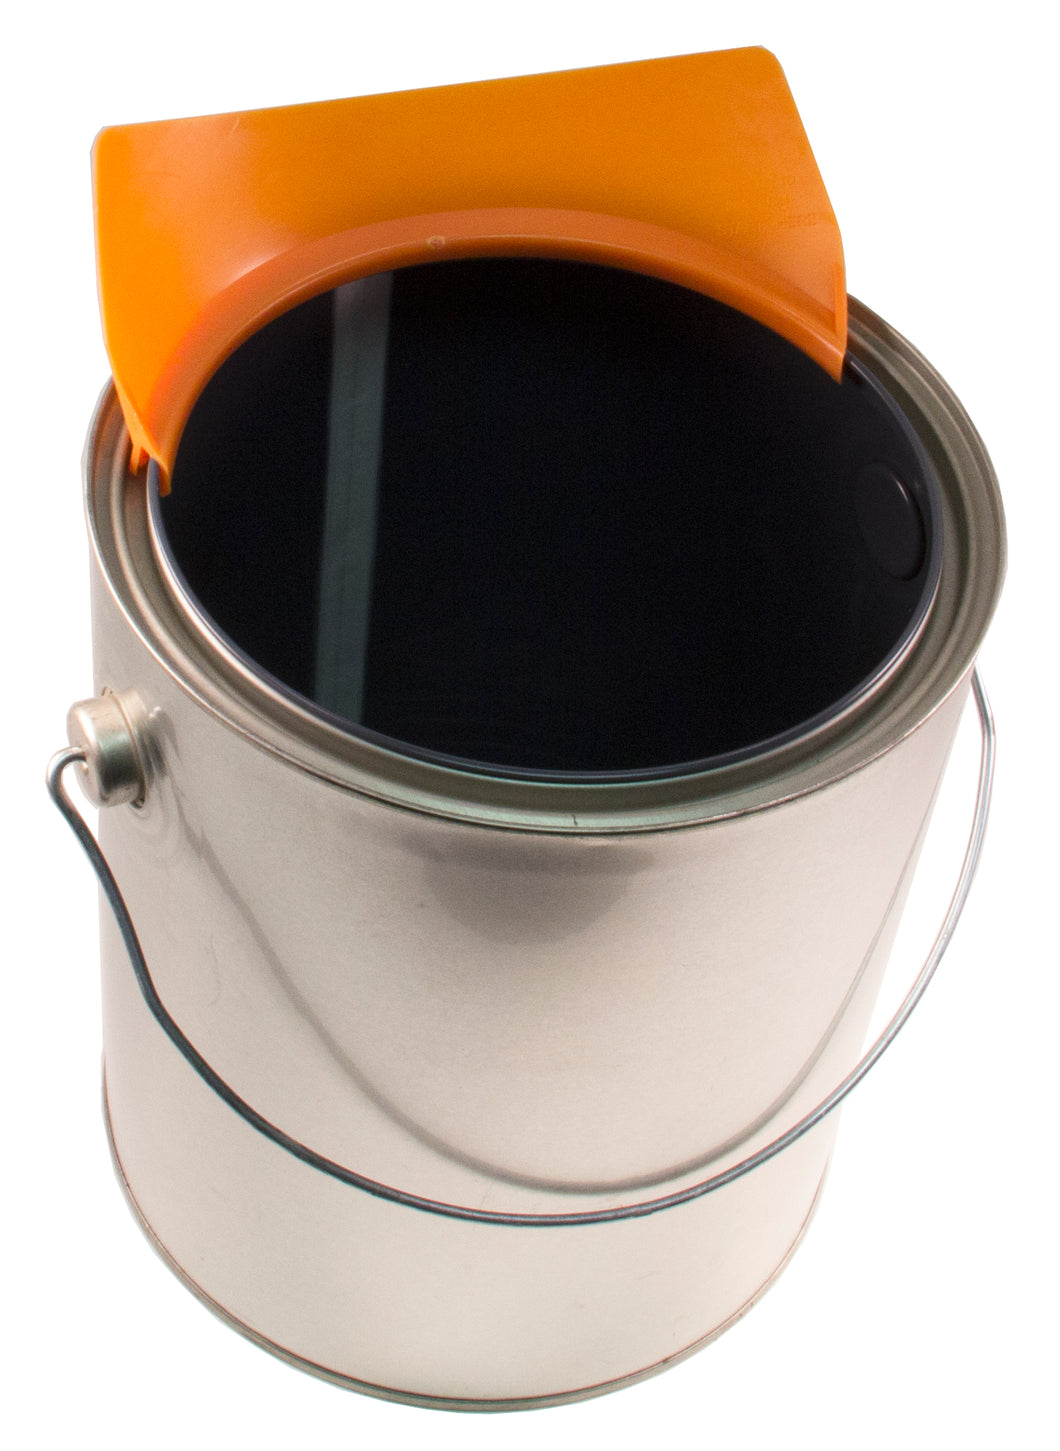 MBS Flexible Paint Can Spout for Quart and Gallon Sized Paint Cans